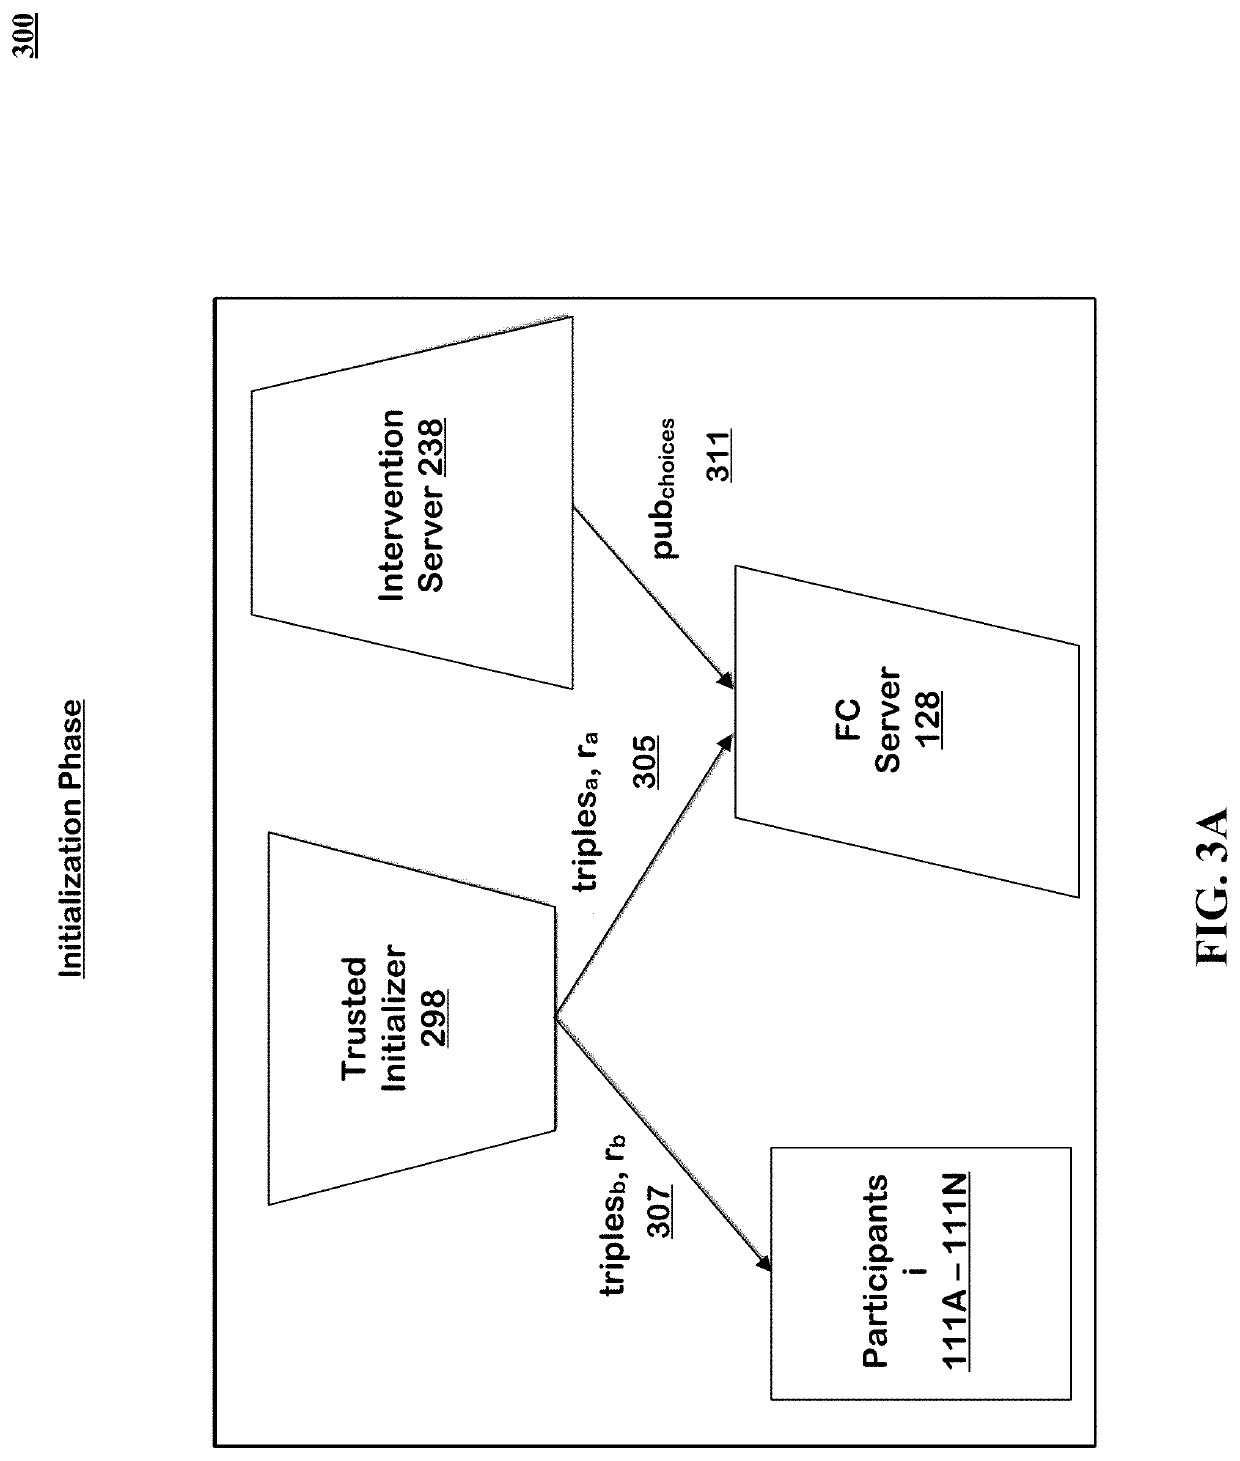 Systems and Methods for Virtual Clinical Trials